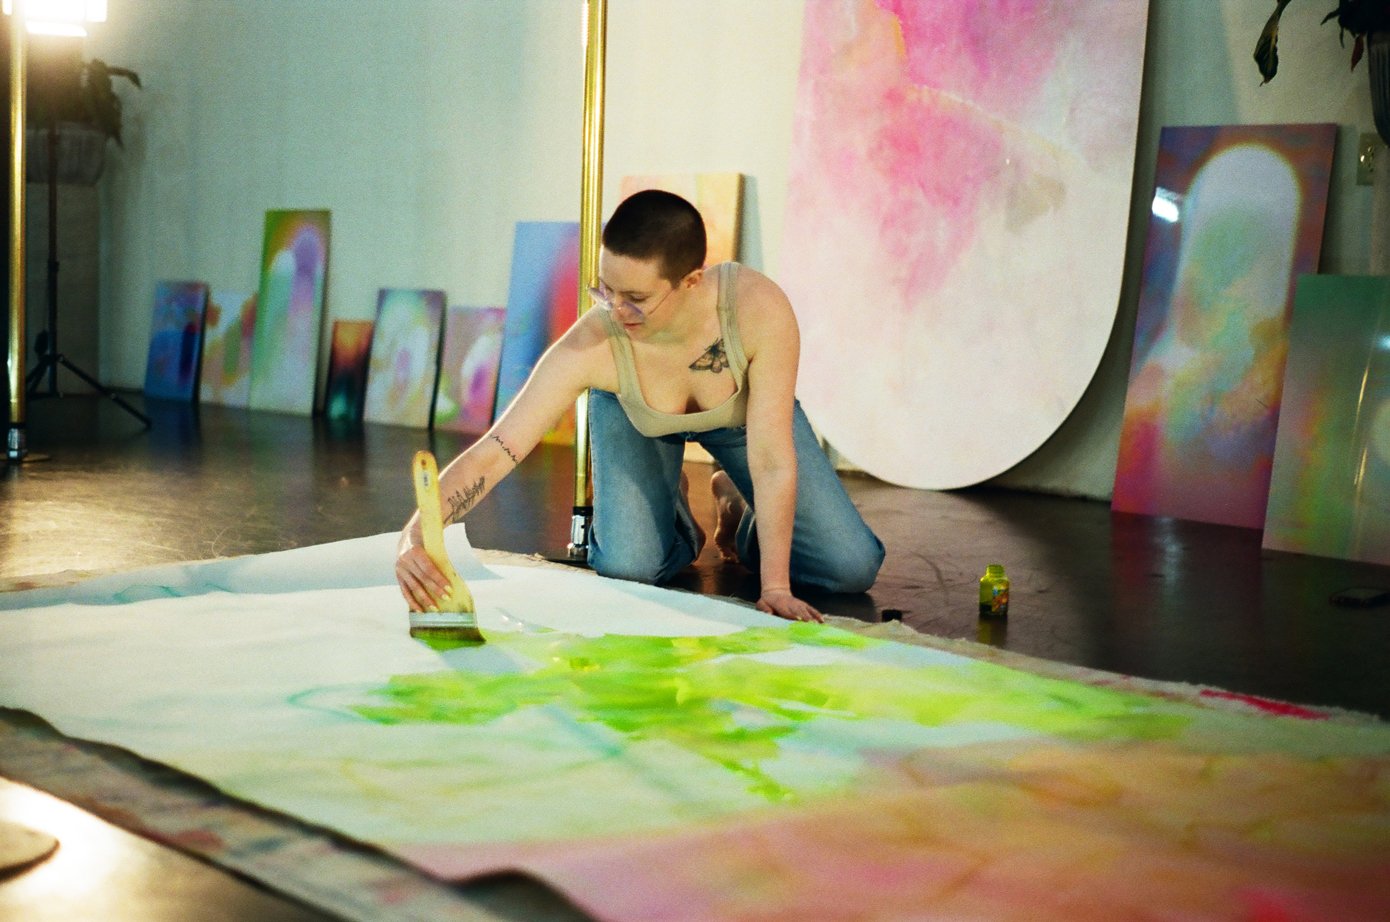 Photograph of Lydia Jewel Gerard, a person with short dark hair, kneeling next to an artwork on which she is painting with a large brush